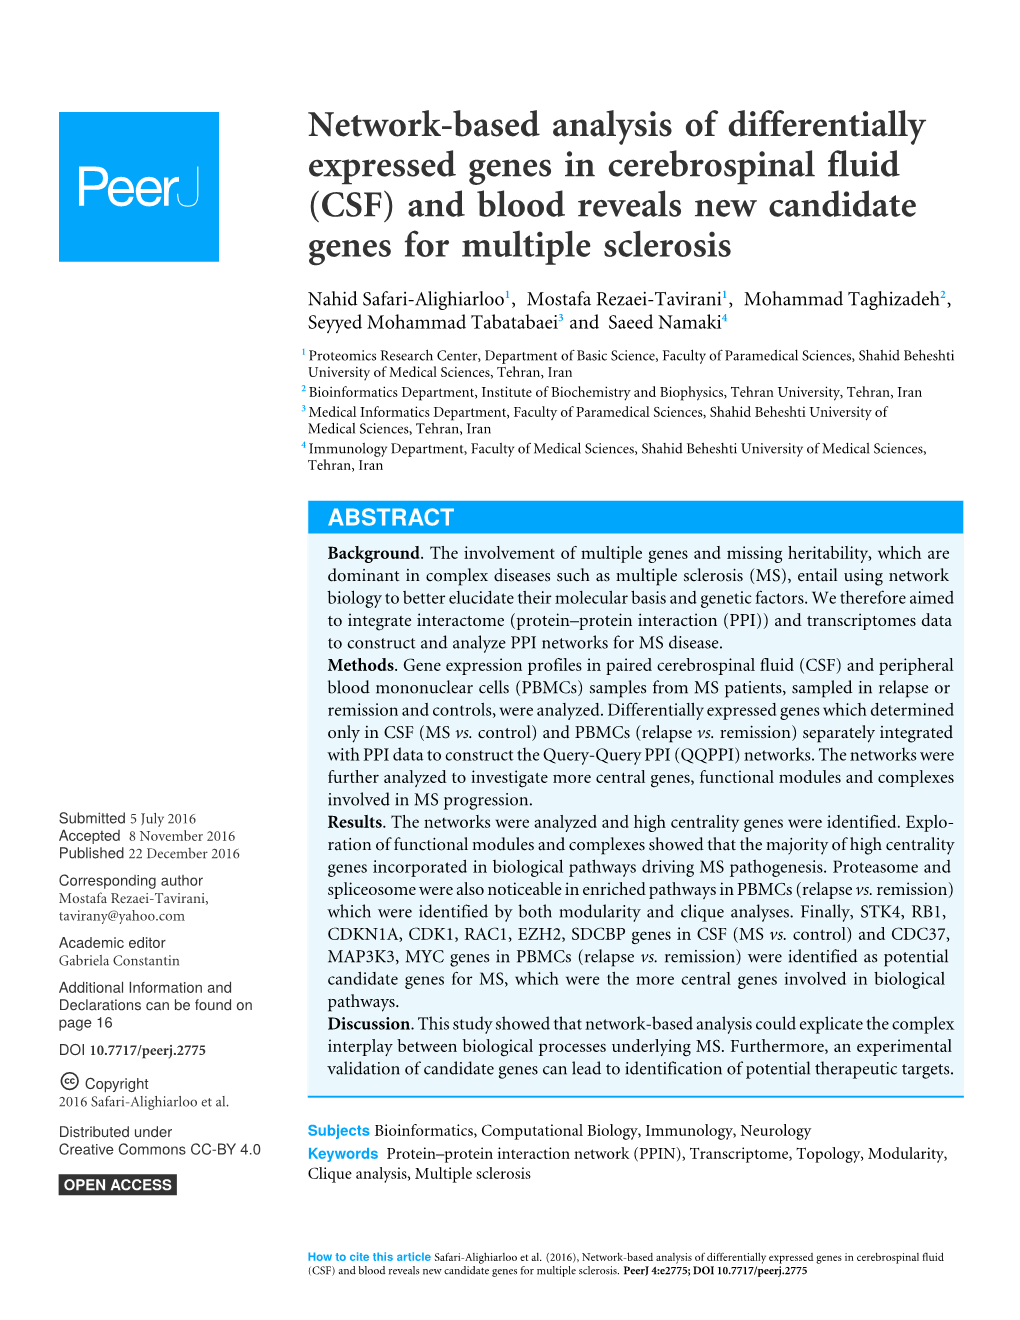 Network-Based Analysis of Differentially Expressed Genes in Cerebrospinal Fluid (CSF) and Blood Reveals New Candidate Genes for Multiple Sclerosis